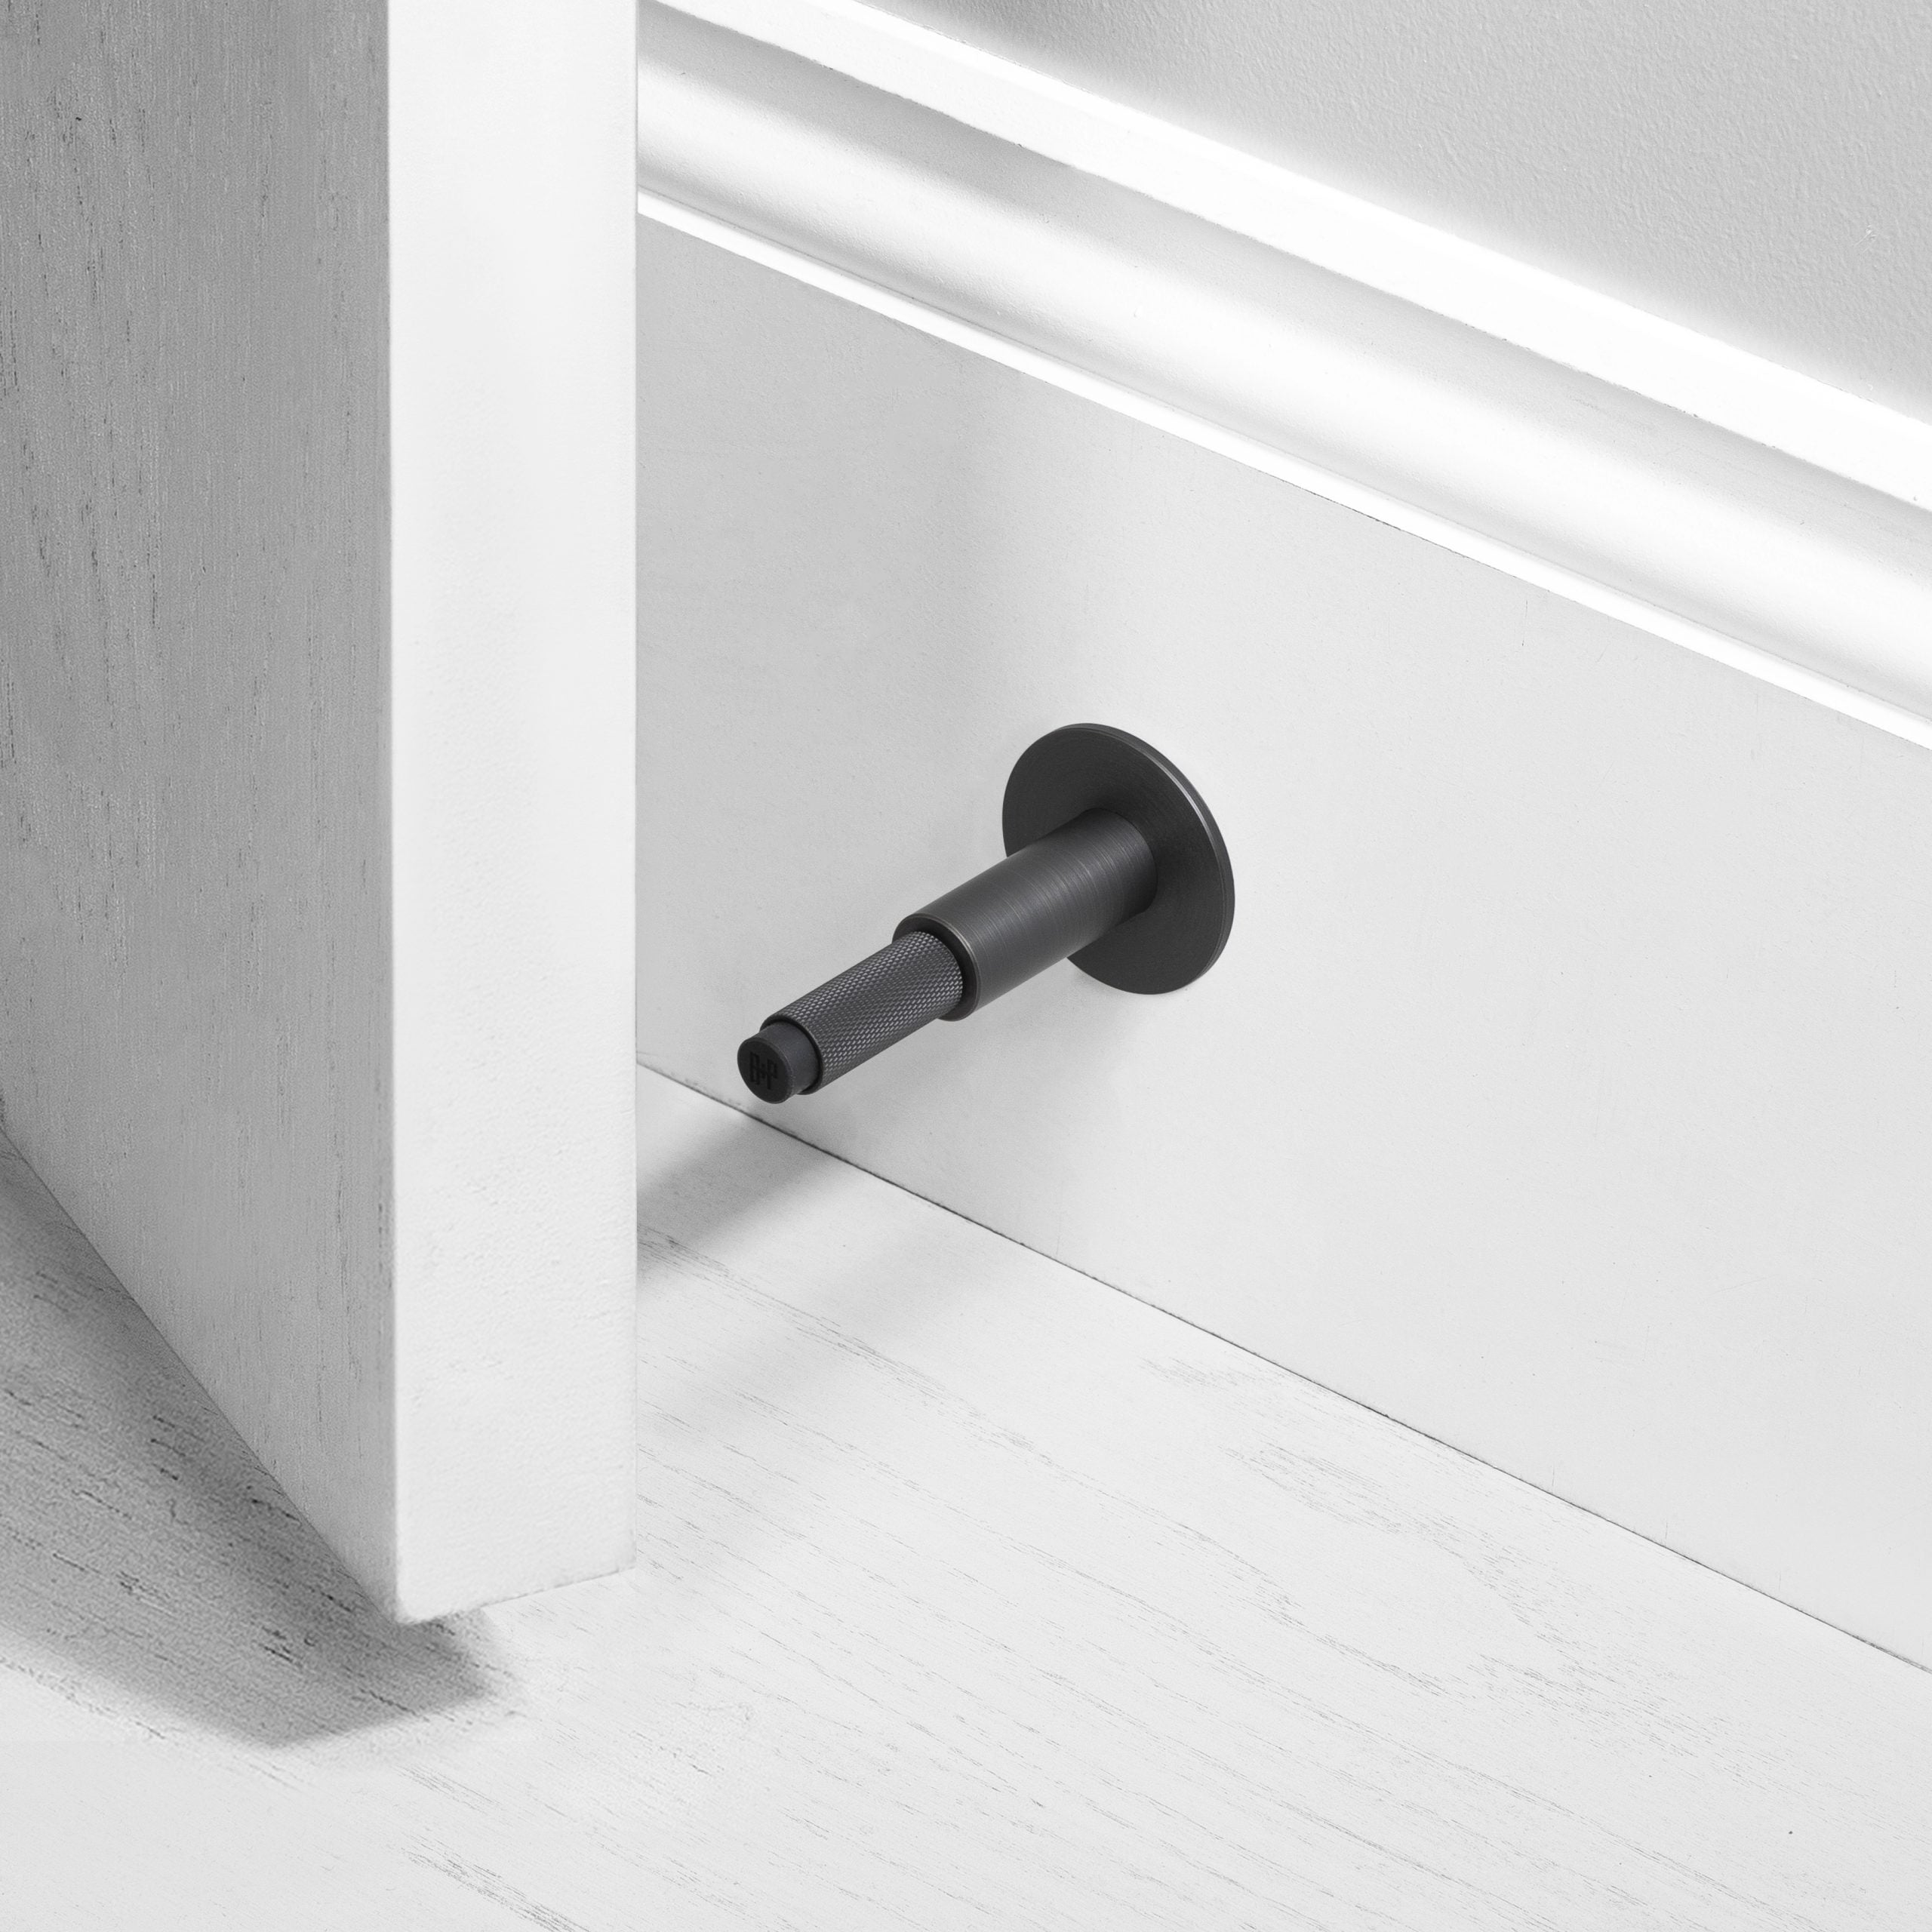 Buster + Punch Wall Mounted Door Stop Hardware Buster + Punch   